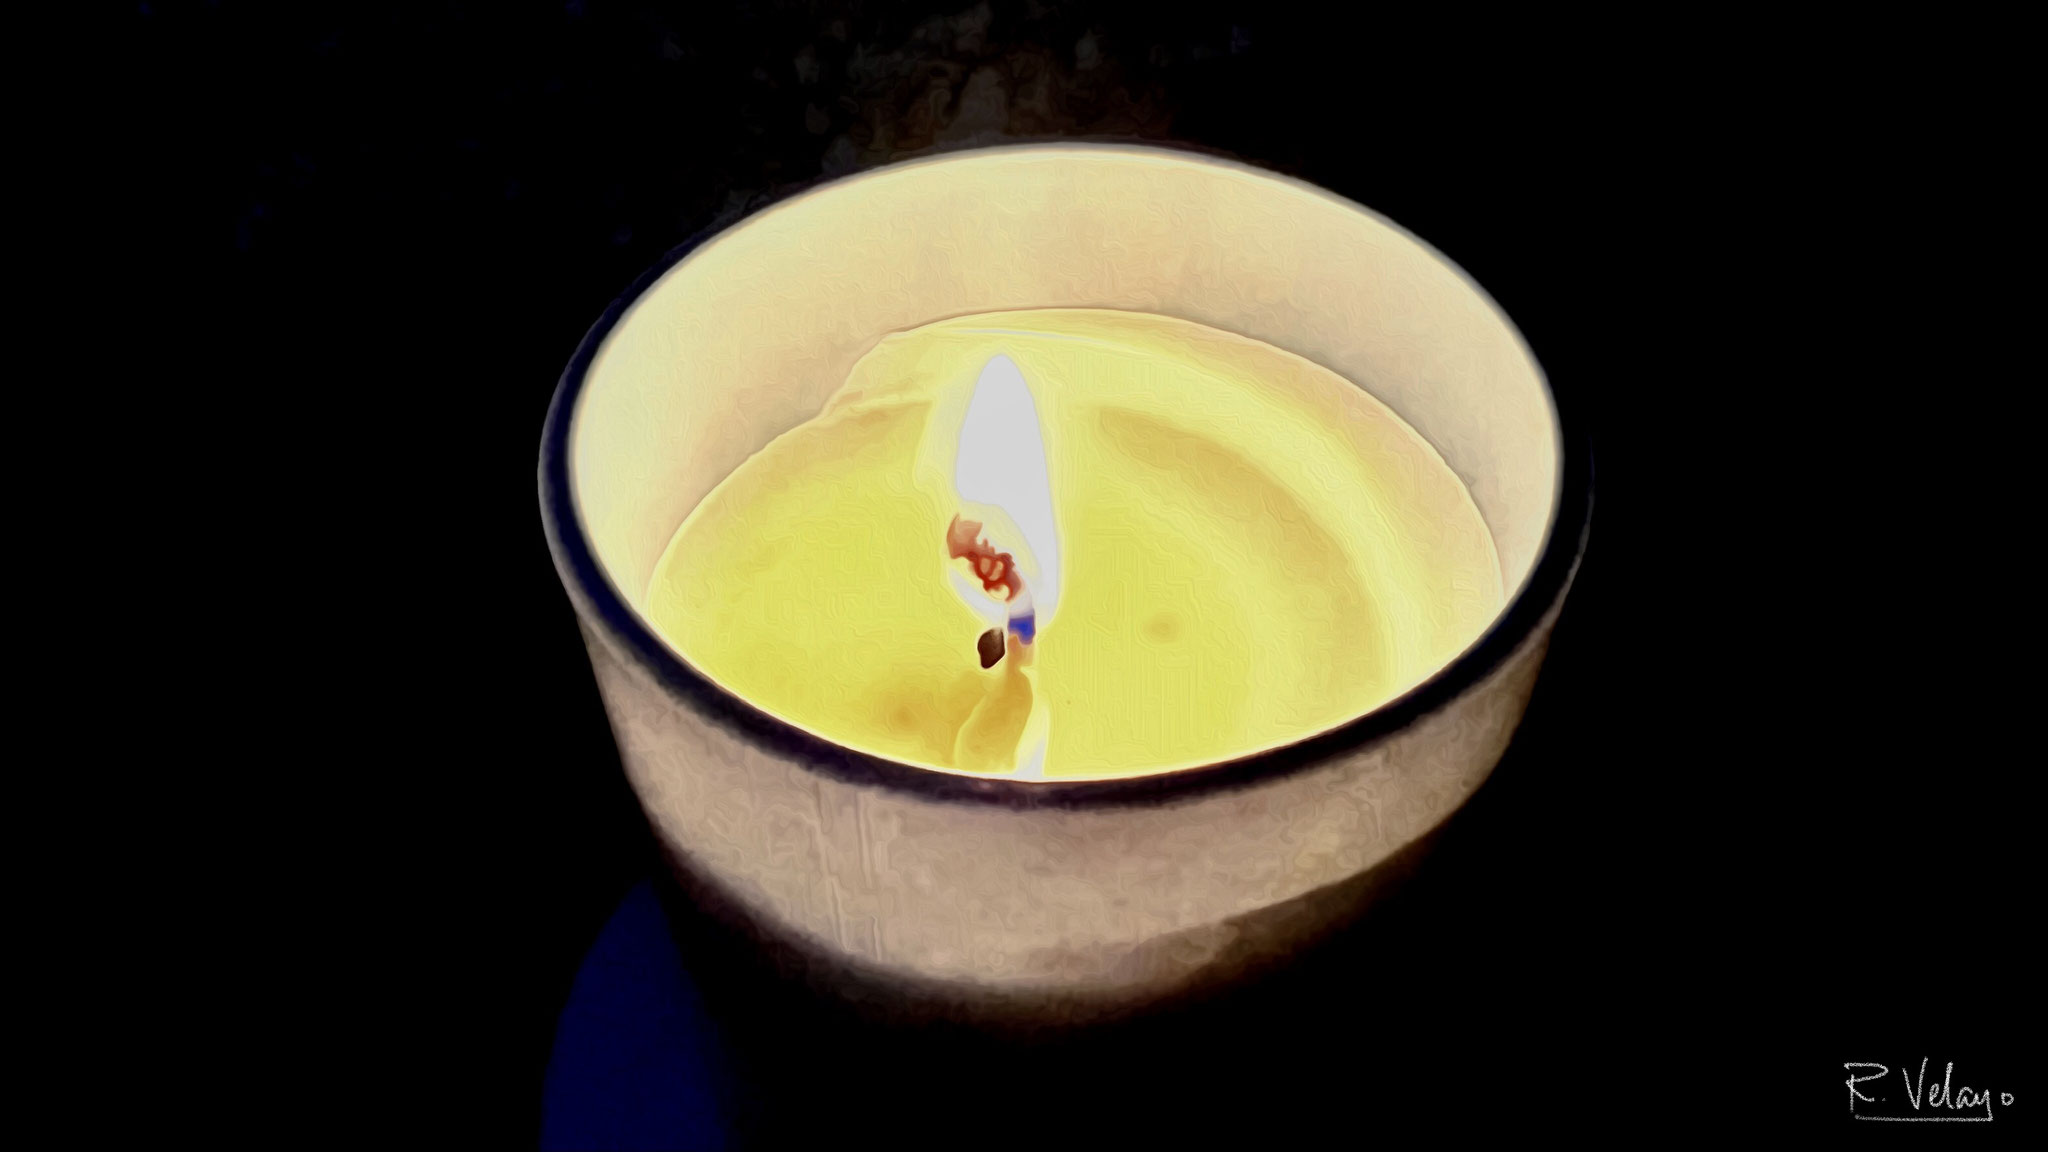 "LIT CANDLE IN GLASS JAR" [Created: 12/05/2021]